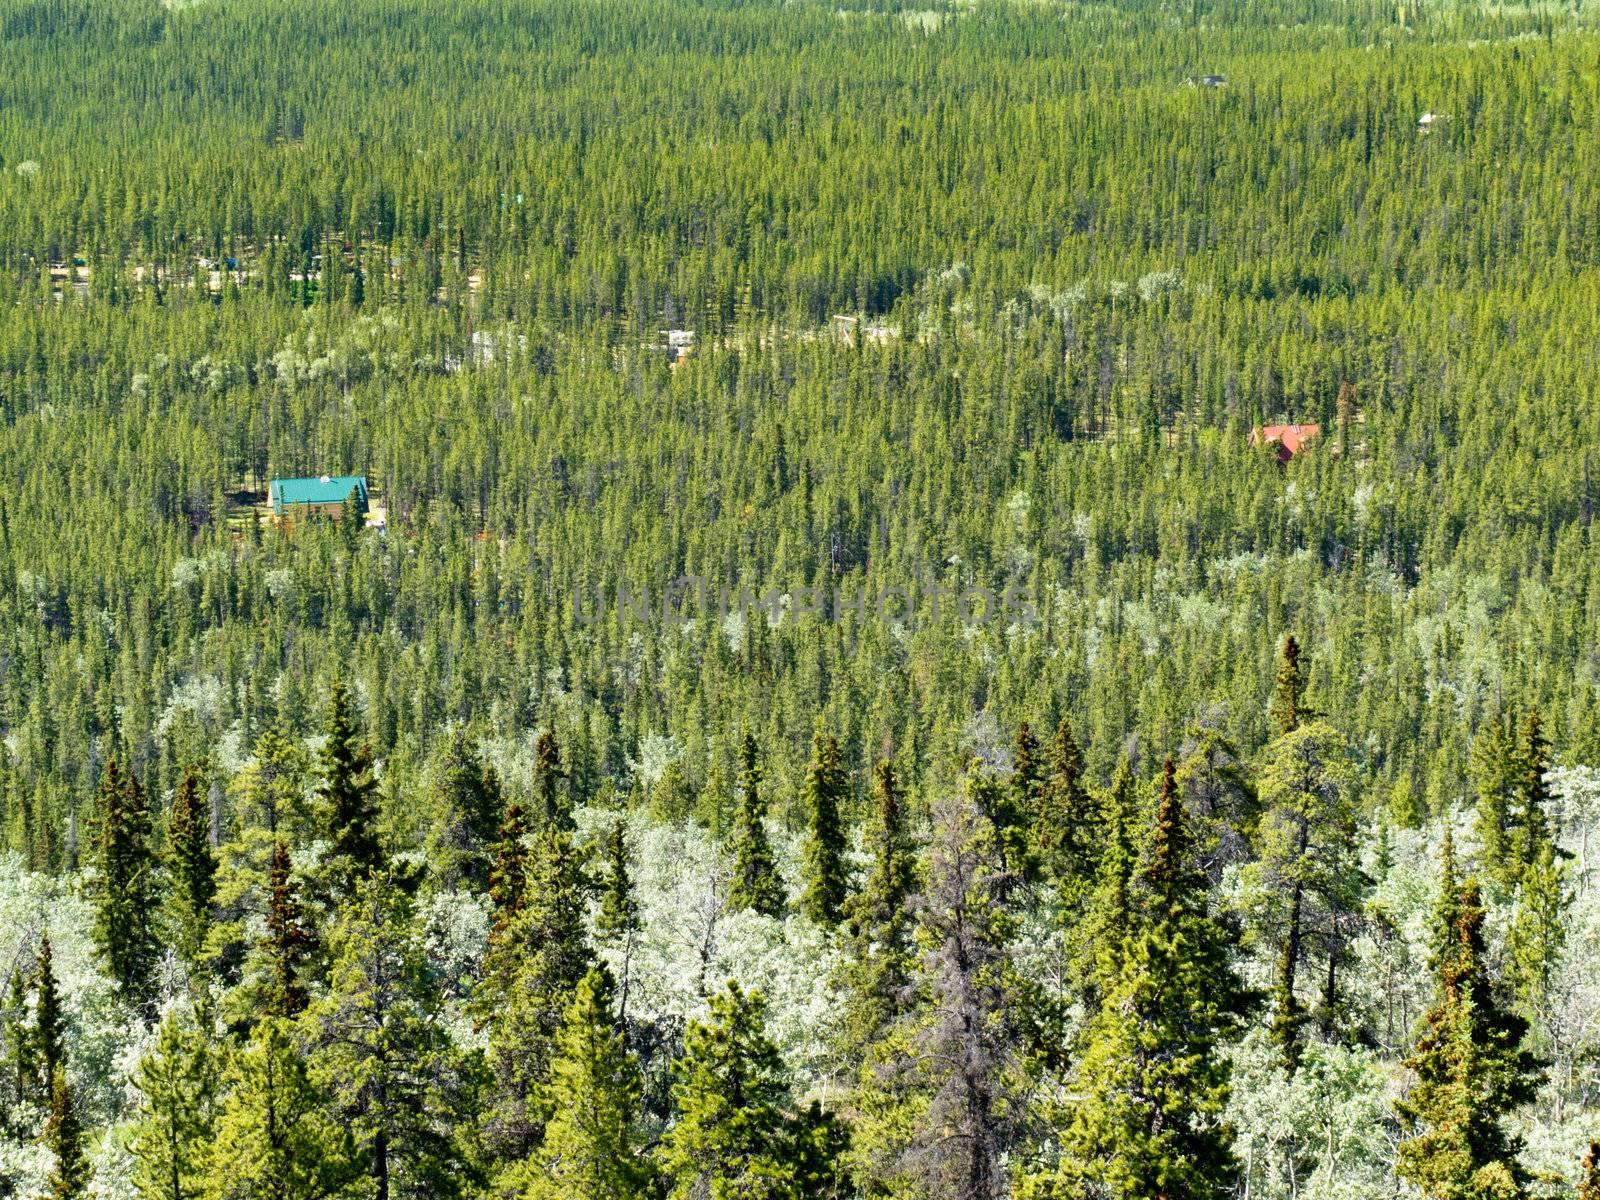 Residential buildings hidden in boreal forest of Yukon Territory, Canada.